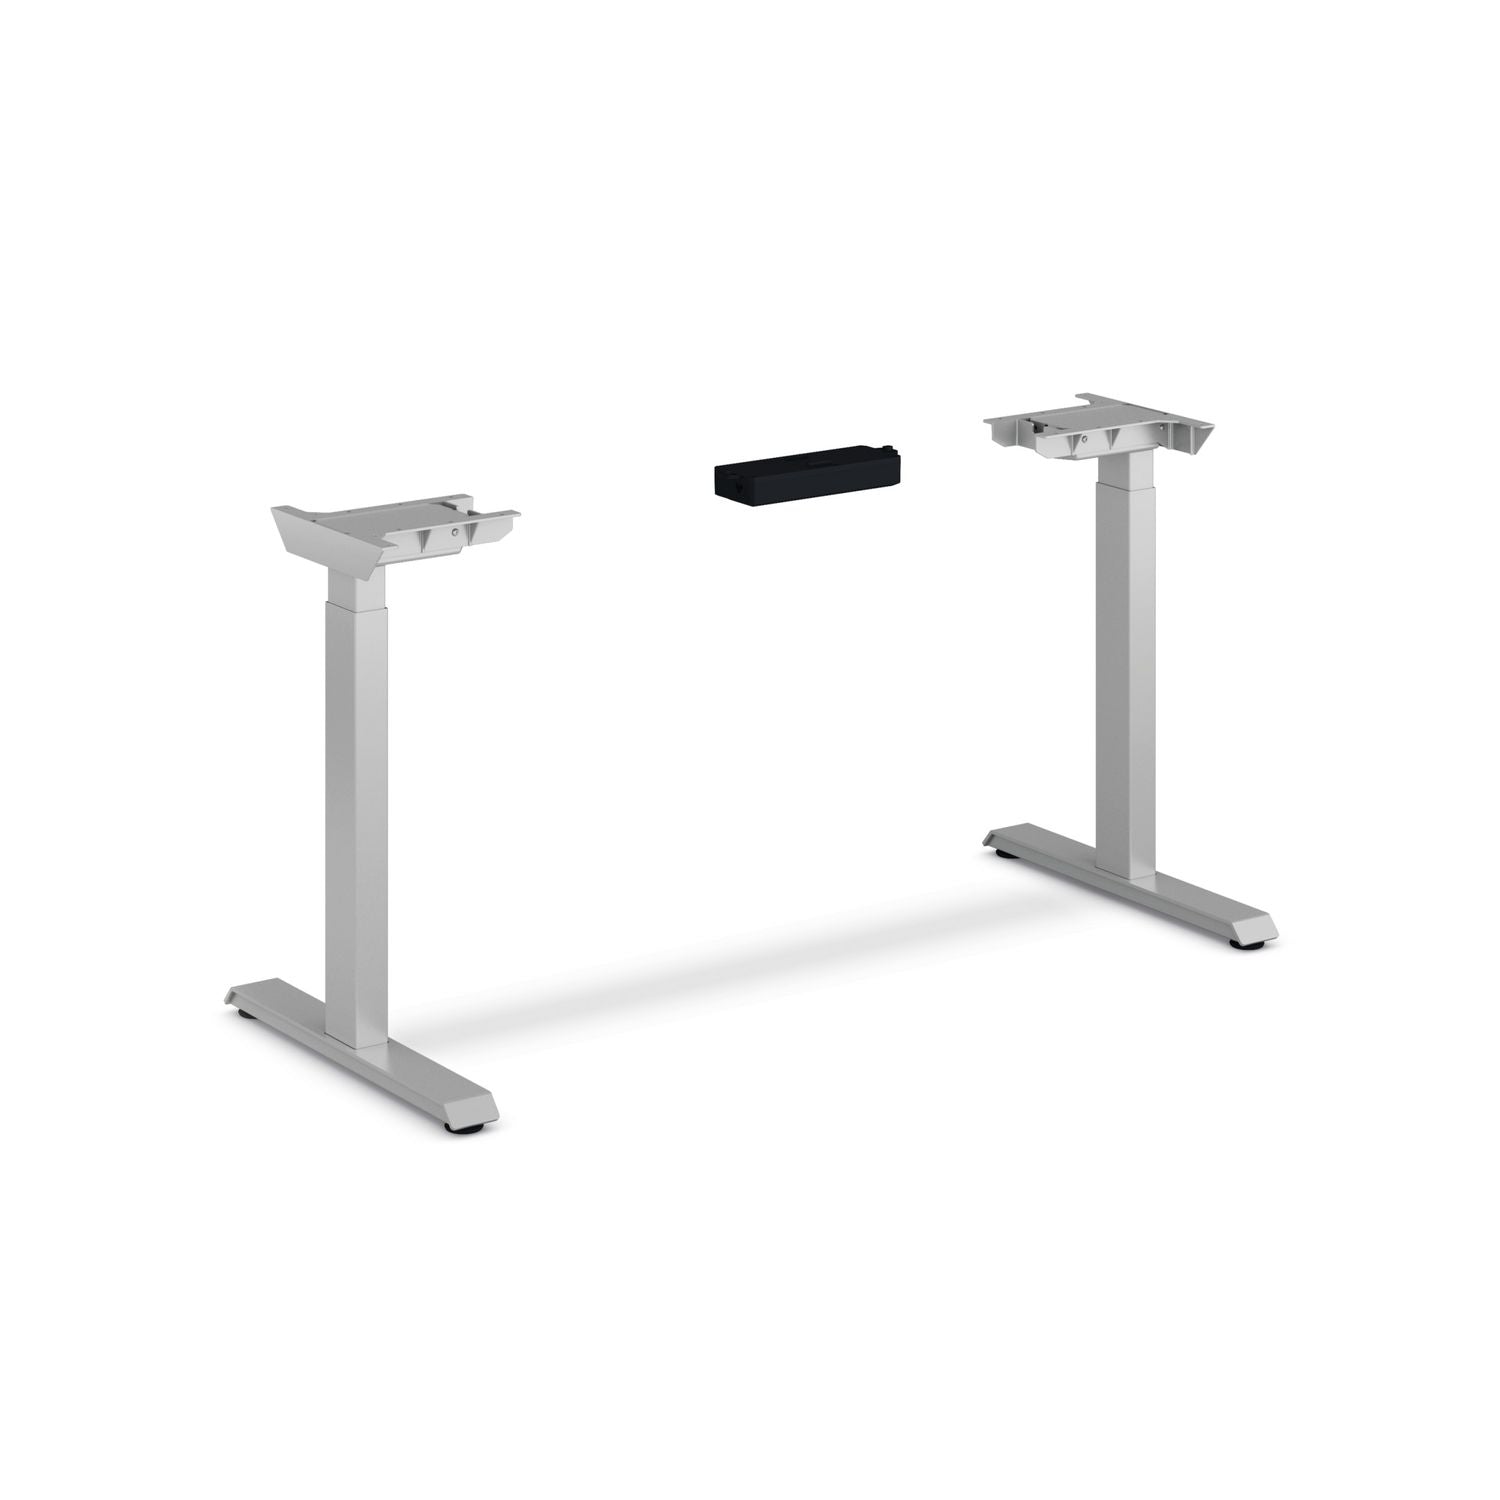 coordinate-height-adjustable-desk-bundle-2-stage-58-x-22-x-2775-to-47-silver-mesh\\silver-ships-in-7-10-business-days_honhat2smsv2258 - 3